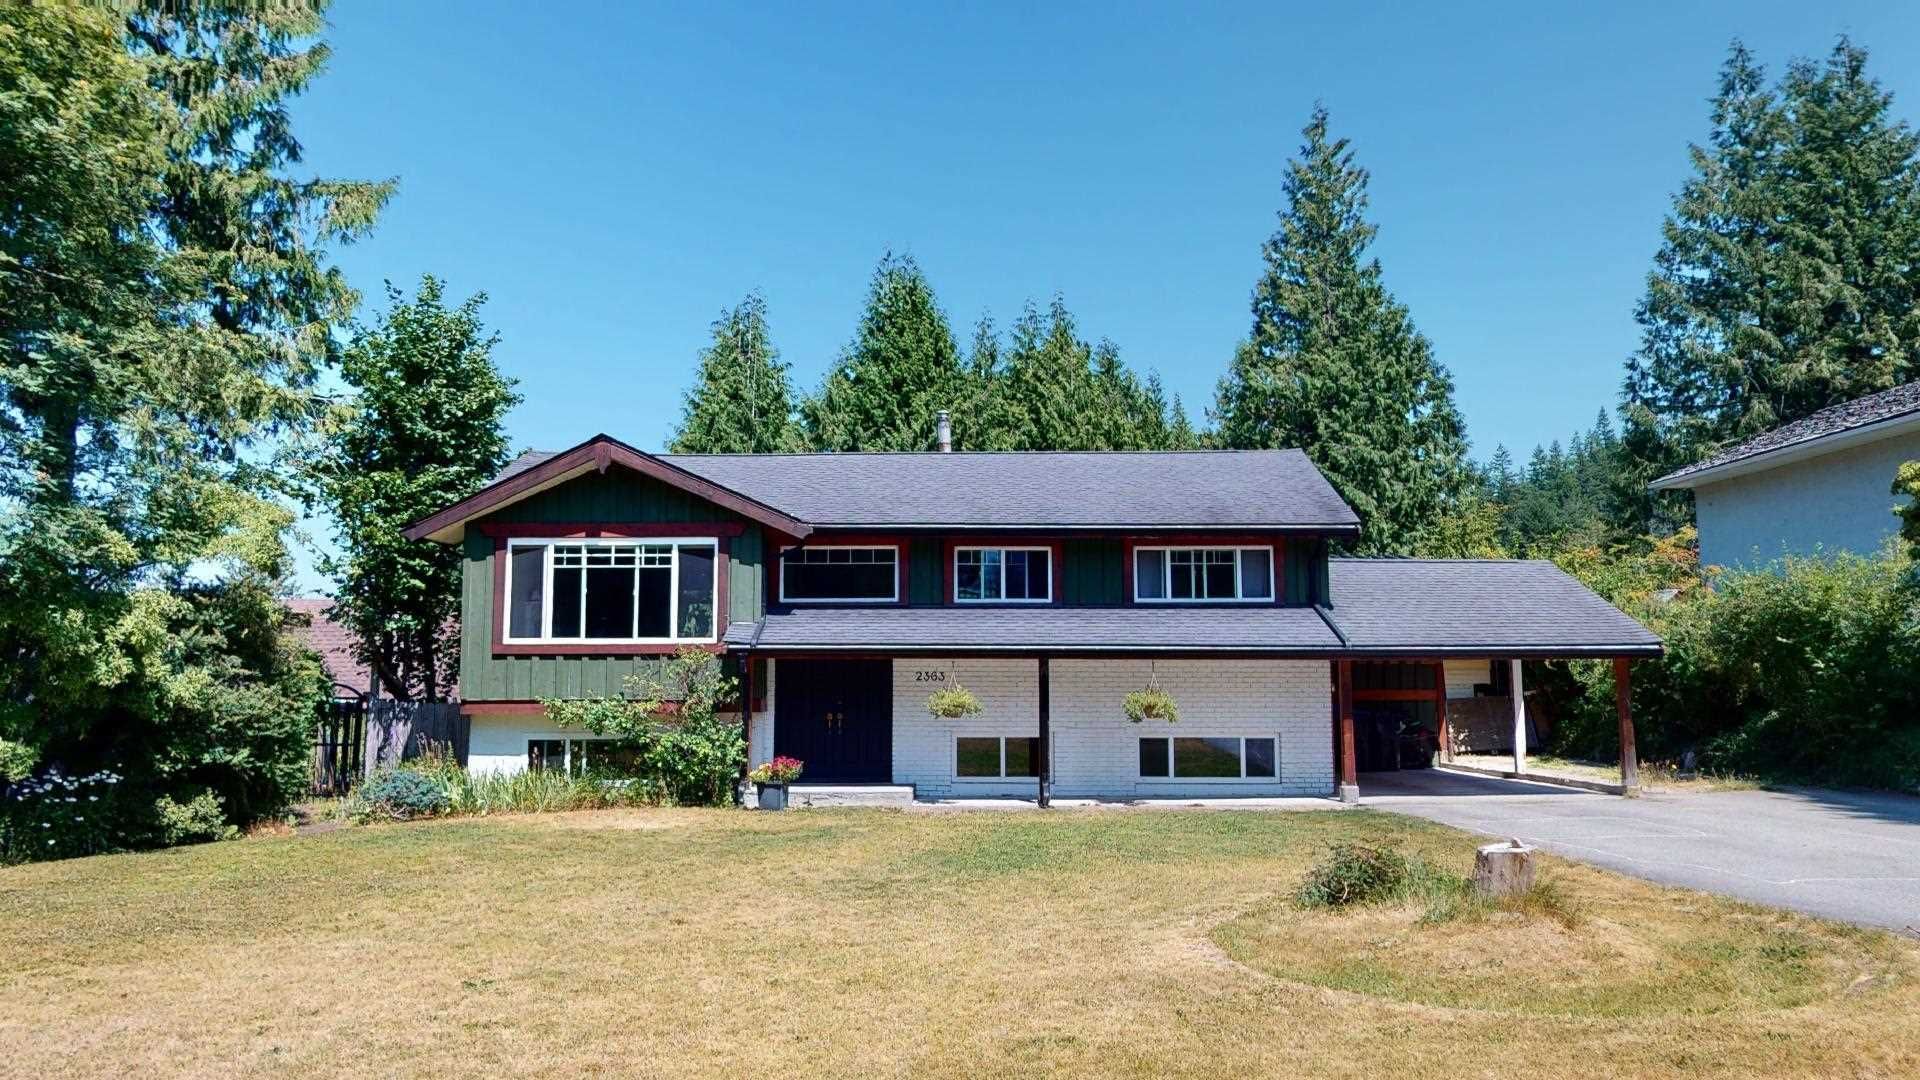 I have sold a property at 2363 THE BOULEVARD in Squamish
